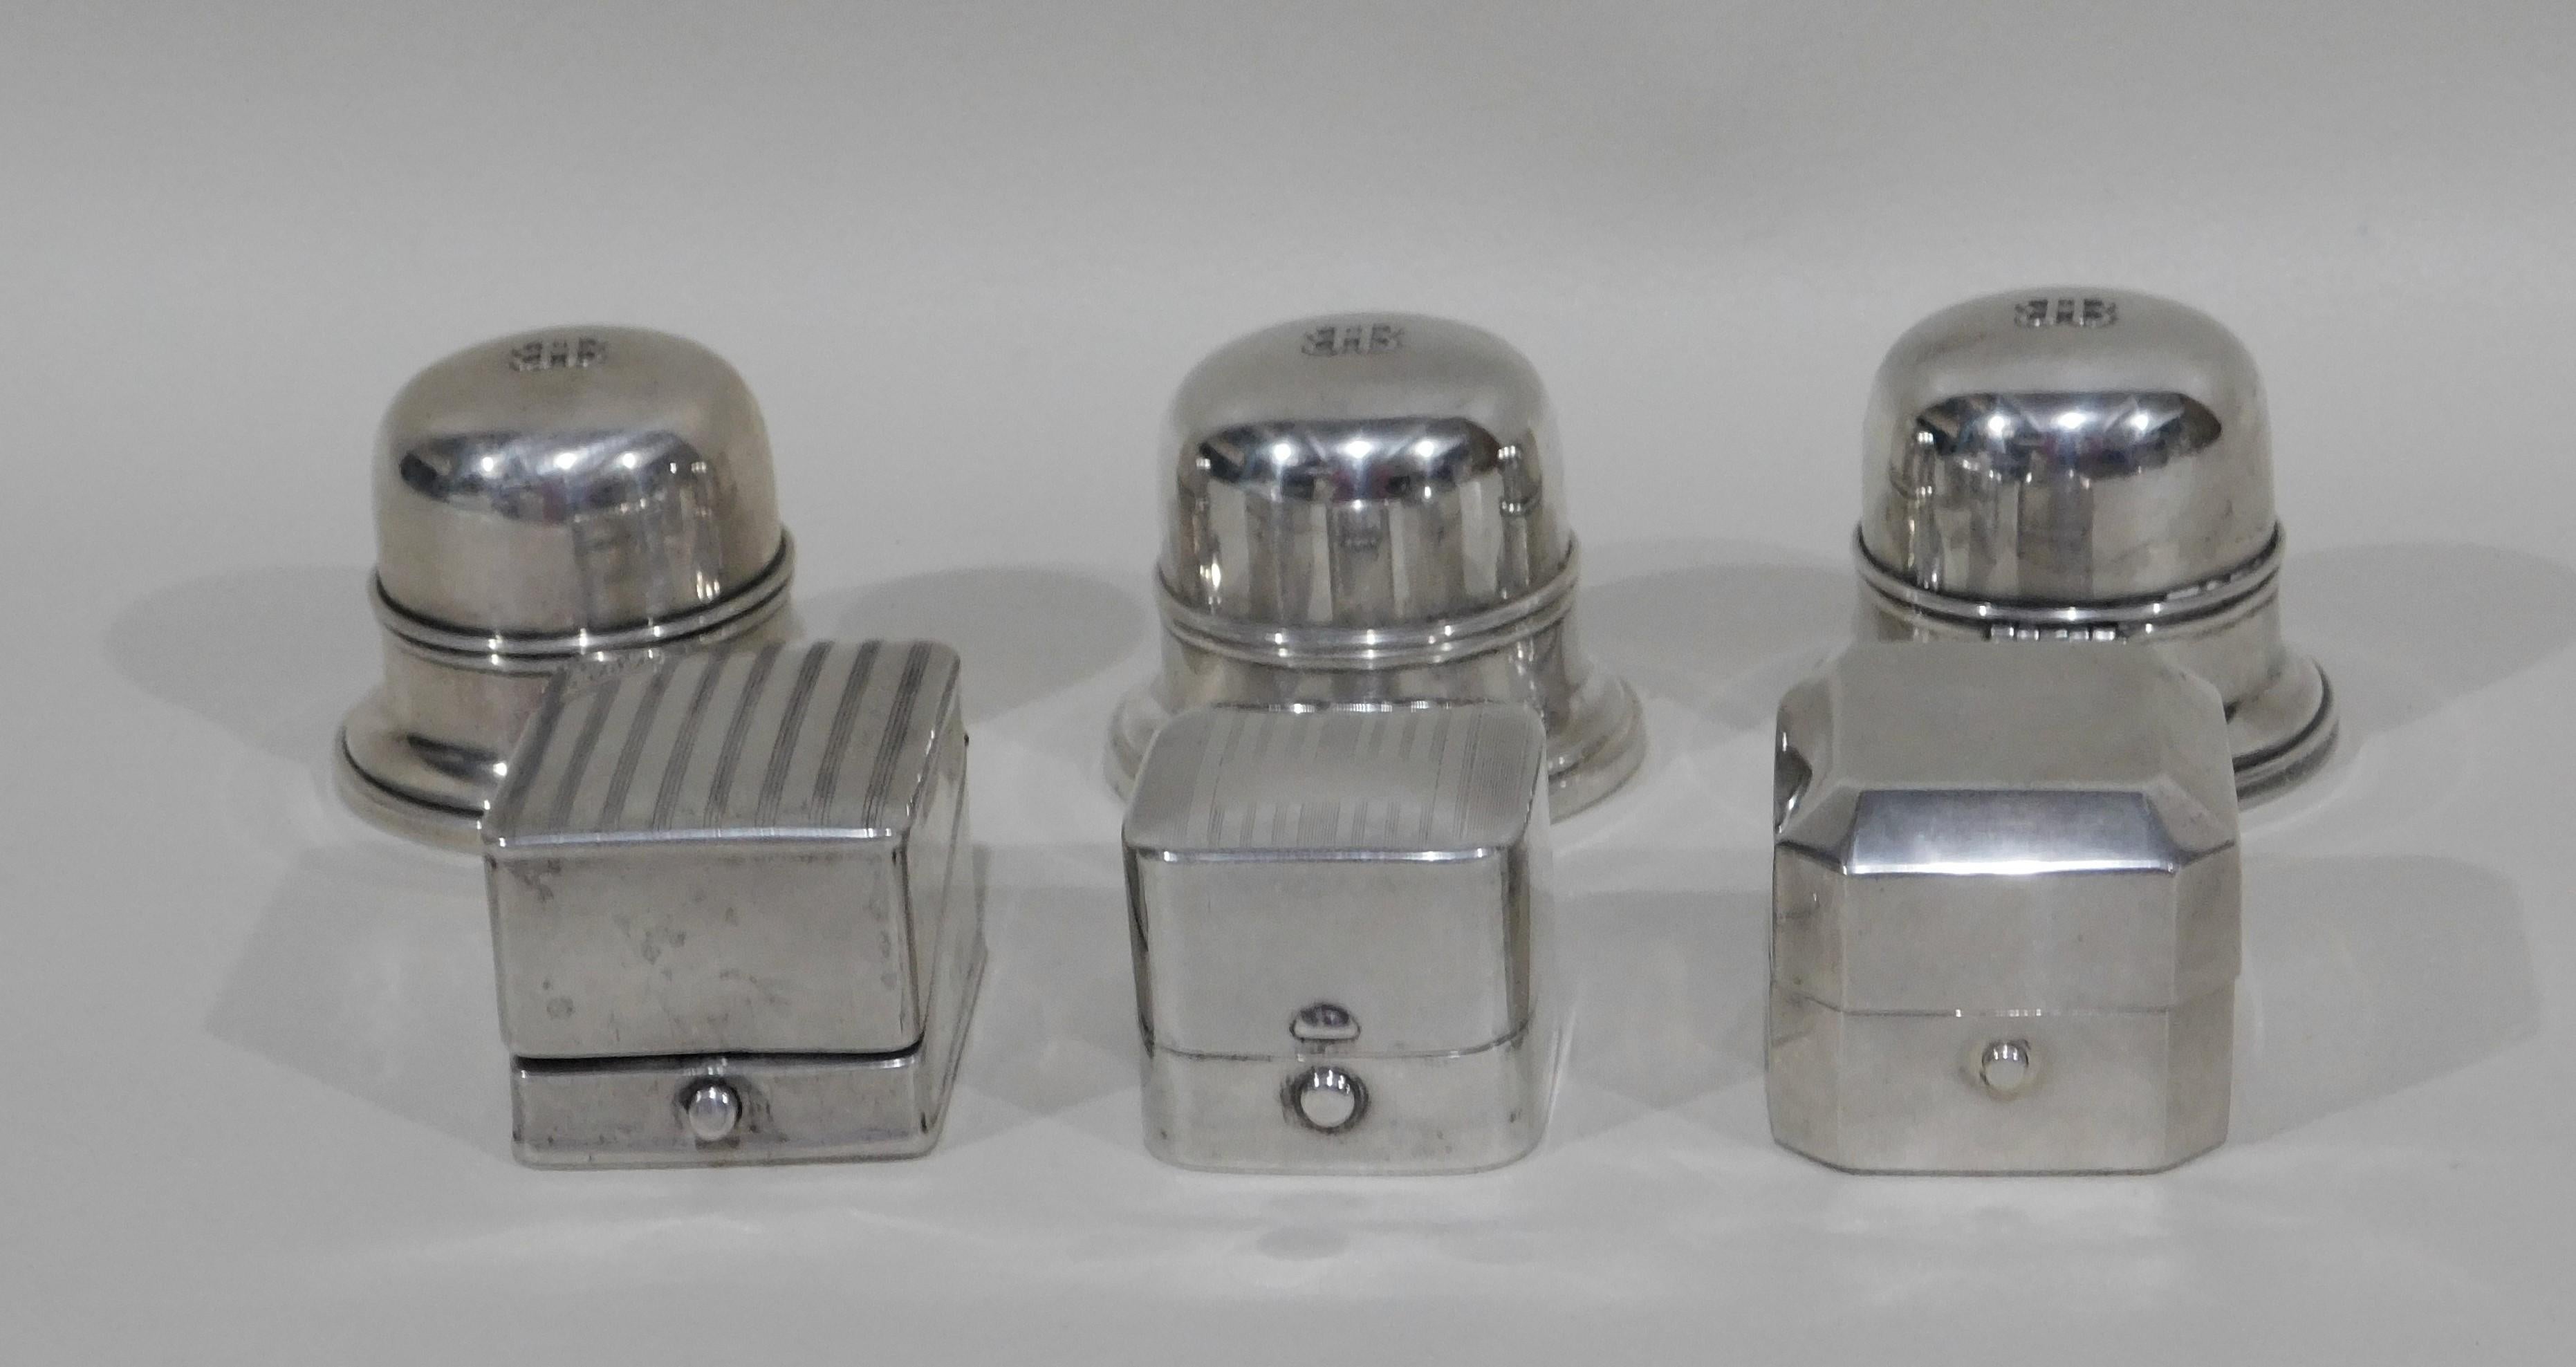 Six sterling silver ring boxes, circa 1920 to 1930s. Three round Birks Toronto Canada measure 2 inches wide x 1.75 inches high and one square box is Birks measuring 1.75 x 1.75 x 1.25 inches high. Two other square boxes are stamped from England.